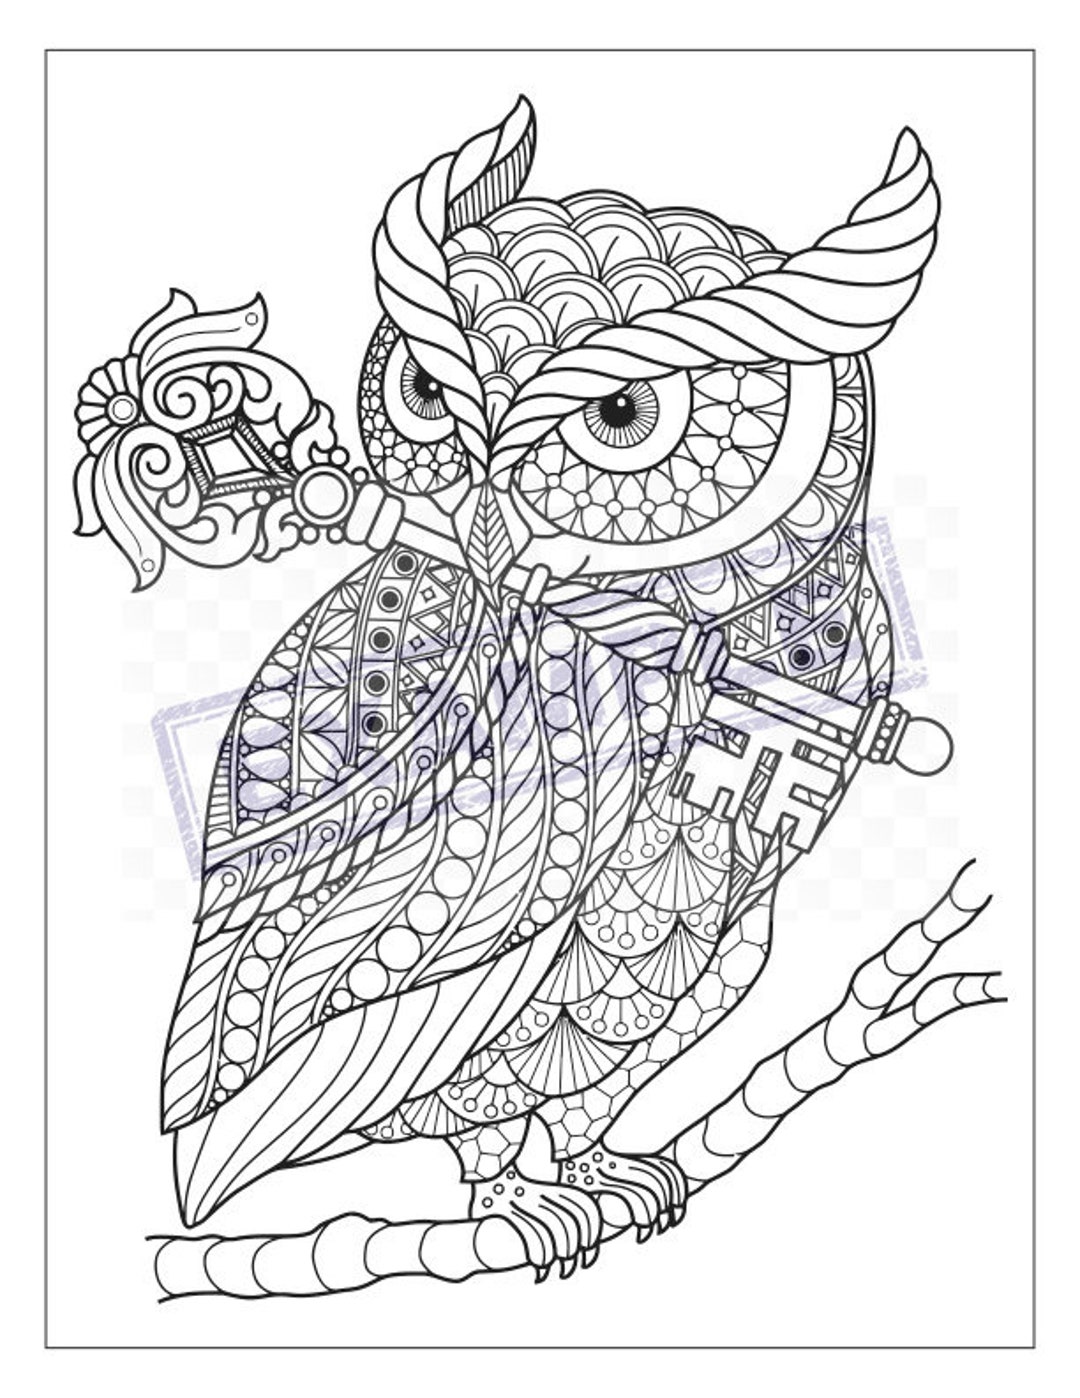 DDI 2345911 Patterns - Adult Coloring Book and Colored Pencil